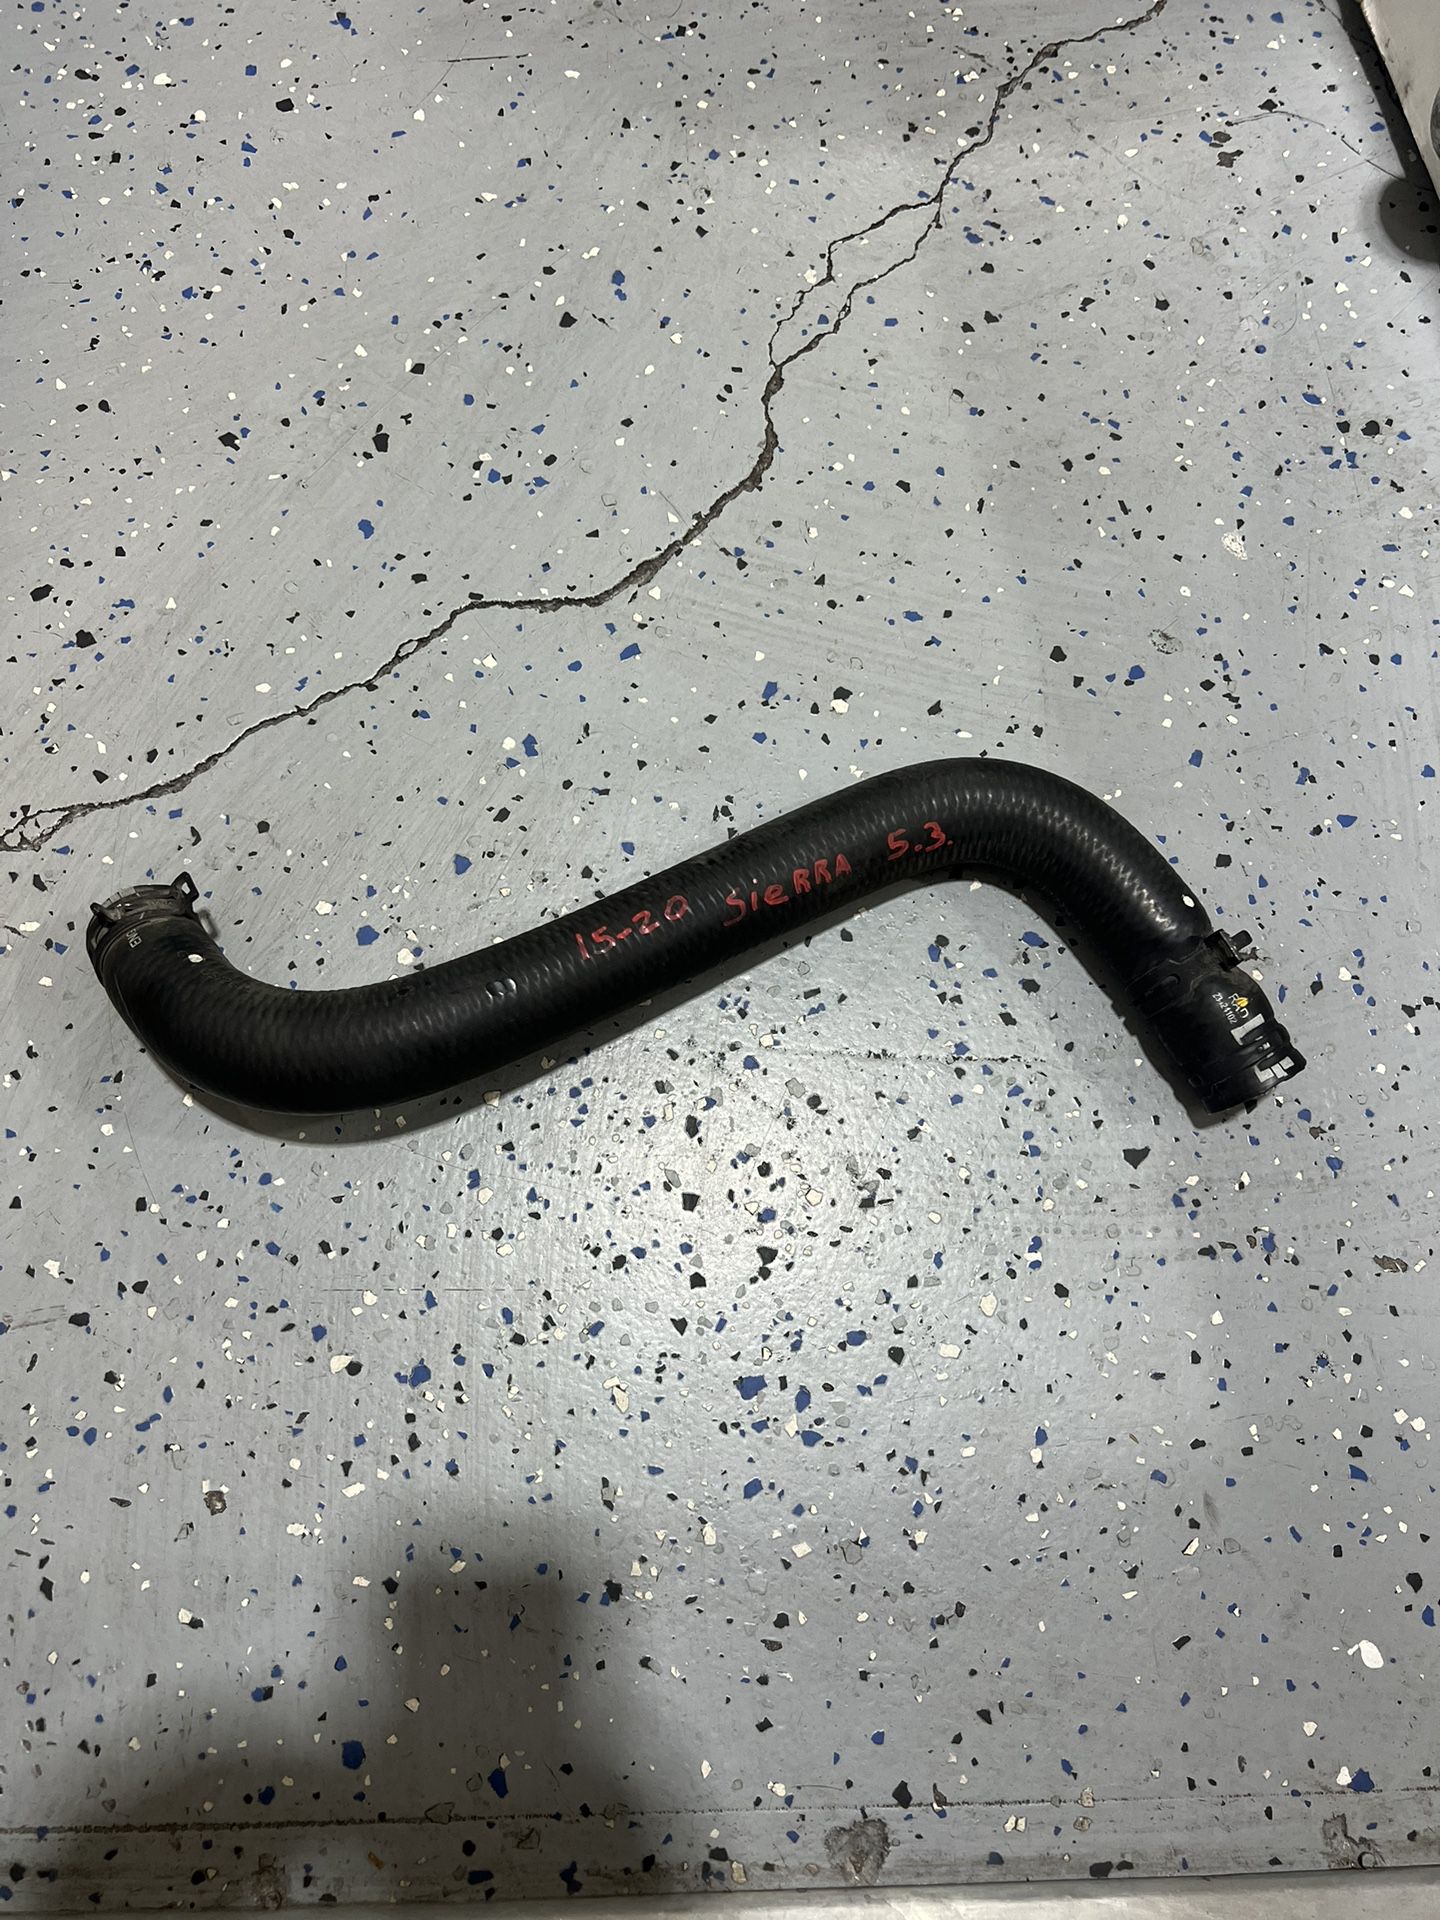 2015-2020 GMC YUKON RADIATOR COOLANT INLET UPPER HOSE TUBE PIPE (contact info removed)2 OEM